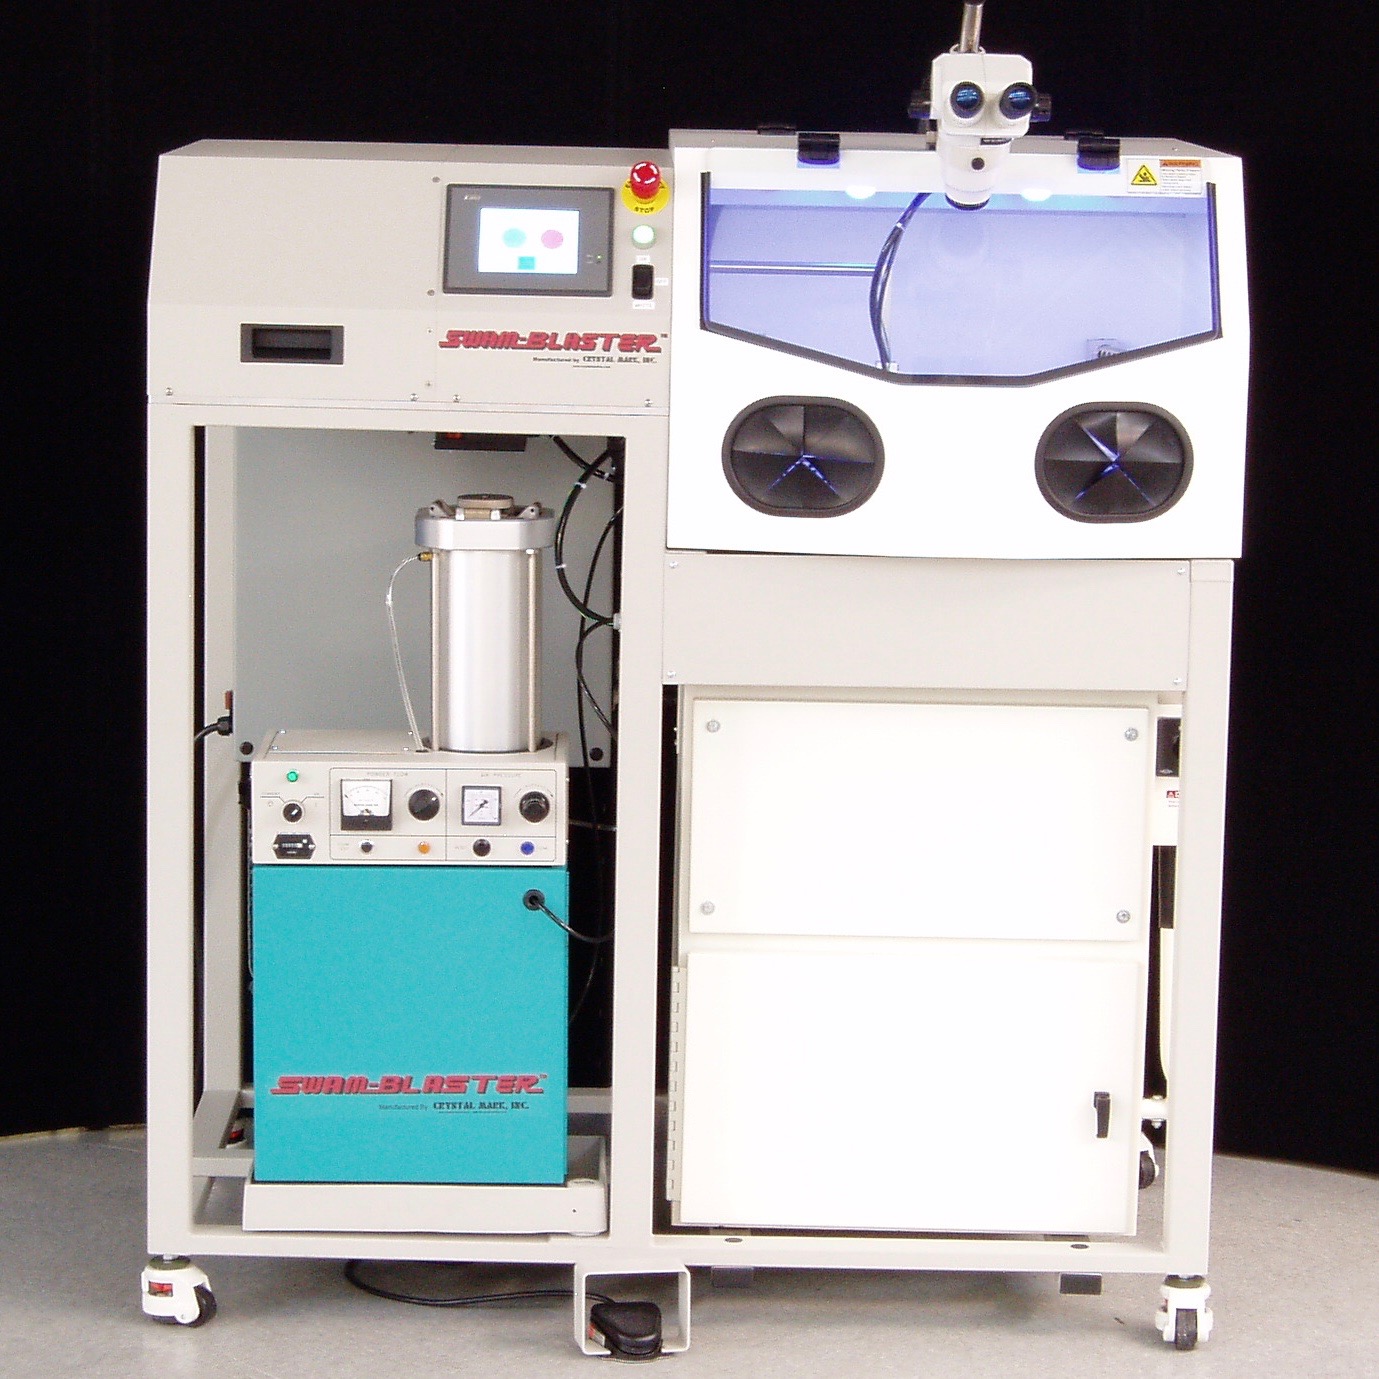 SWAM-Blaster® Model CCR-NP16X16 | Automated Conformal Coating Removal System with LV-1 or LV-2 Sand Blaster